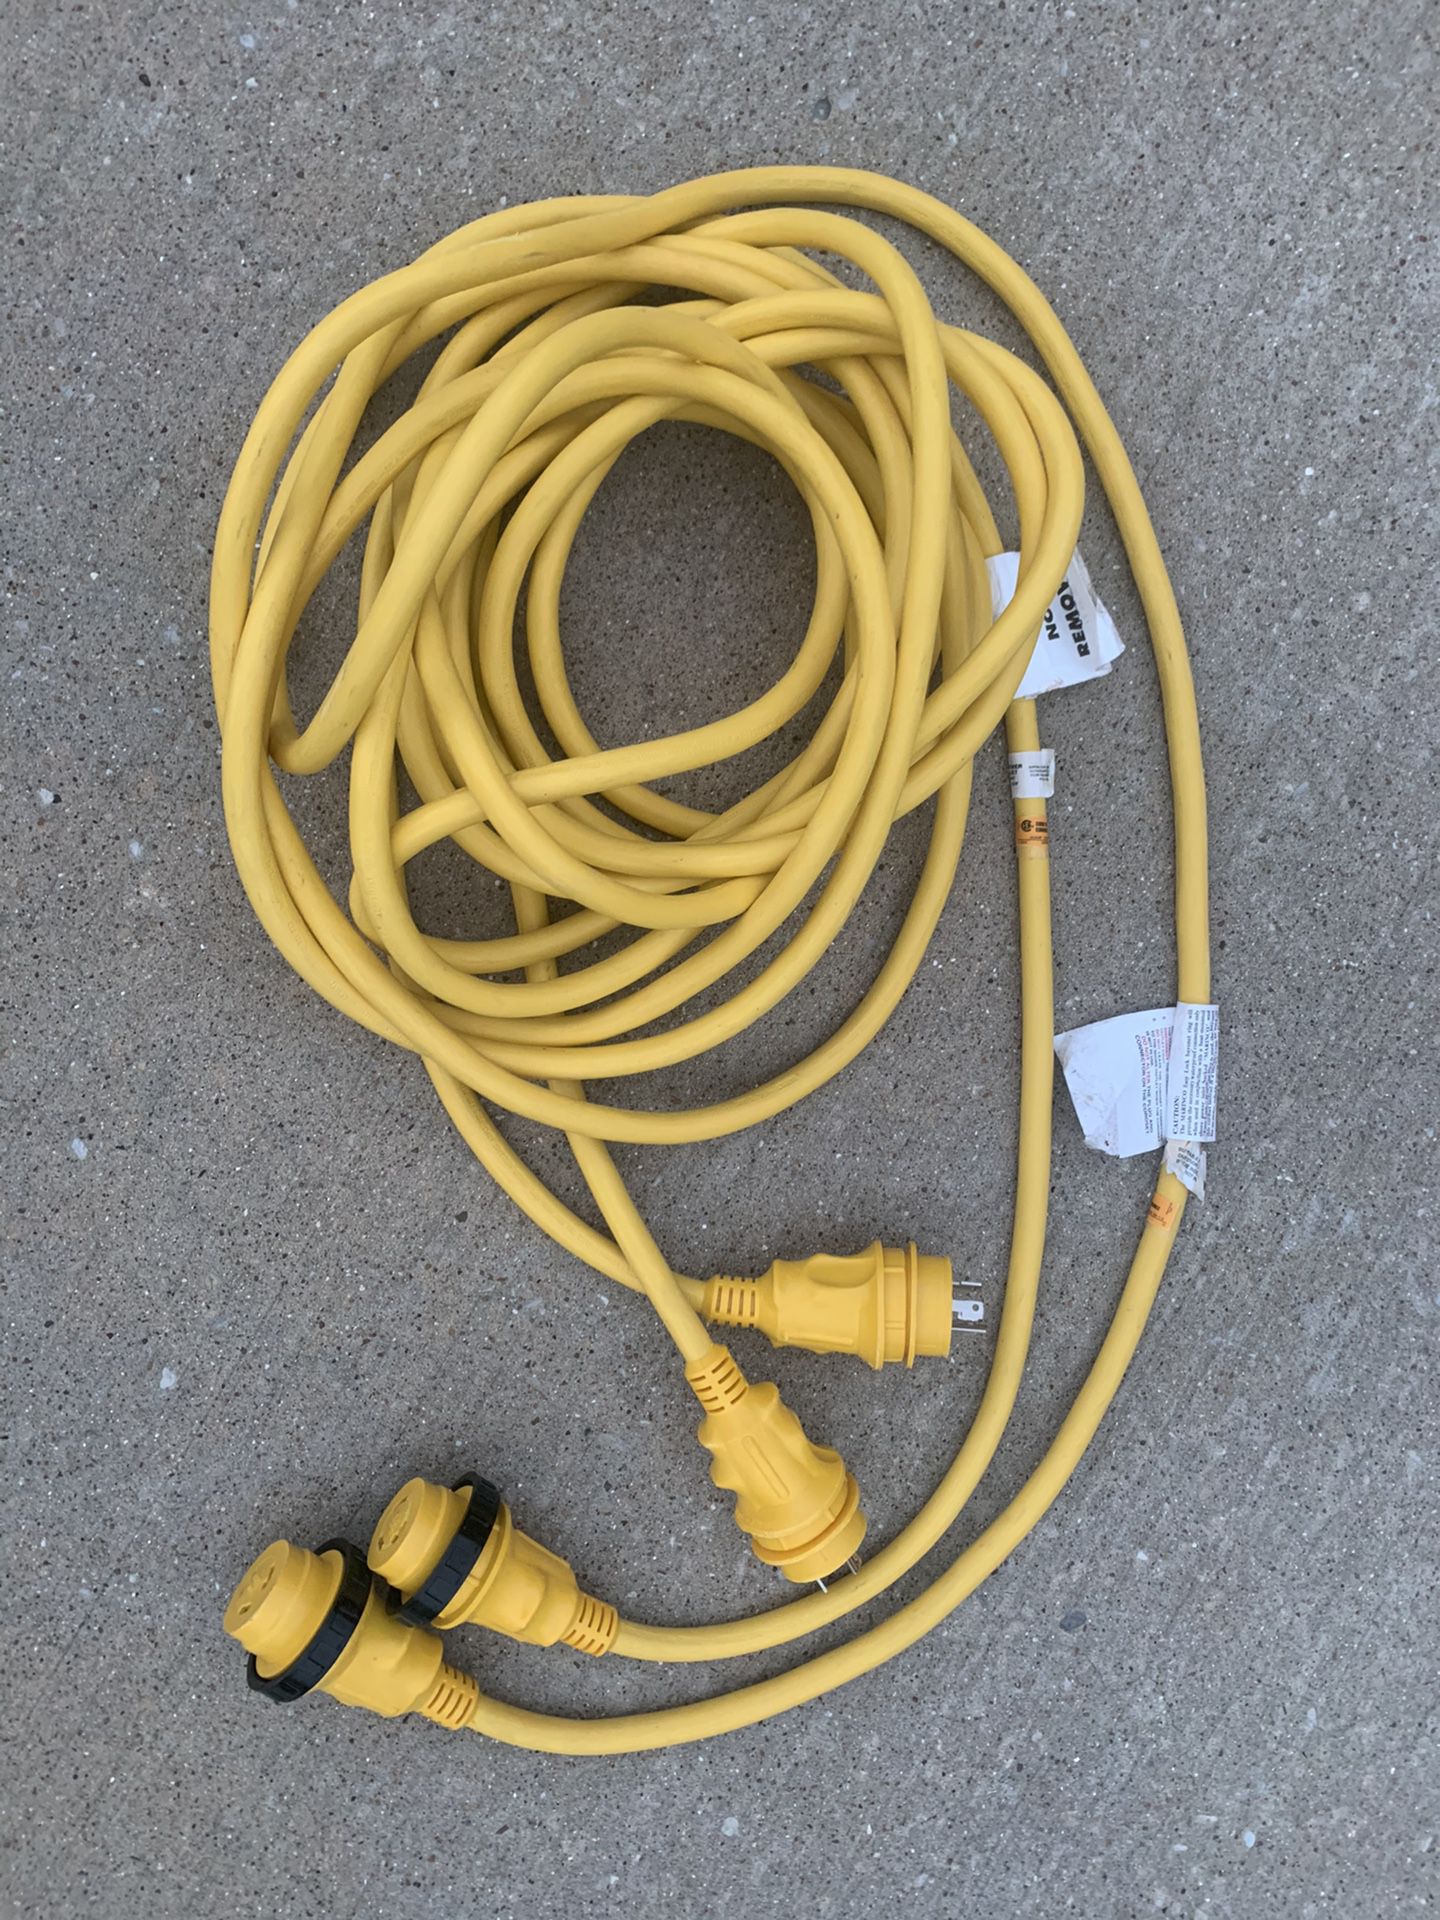 125 Volt 30 Amp Marine Cords - almost brand new. 25 ft. 2 cords.